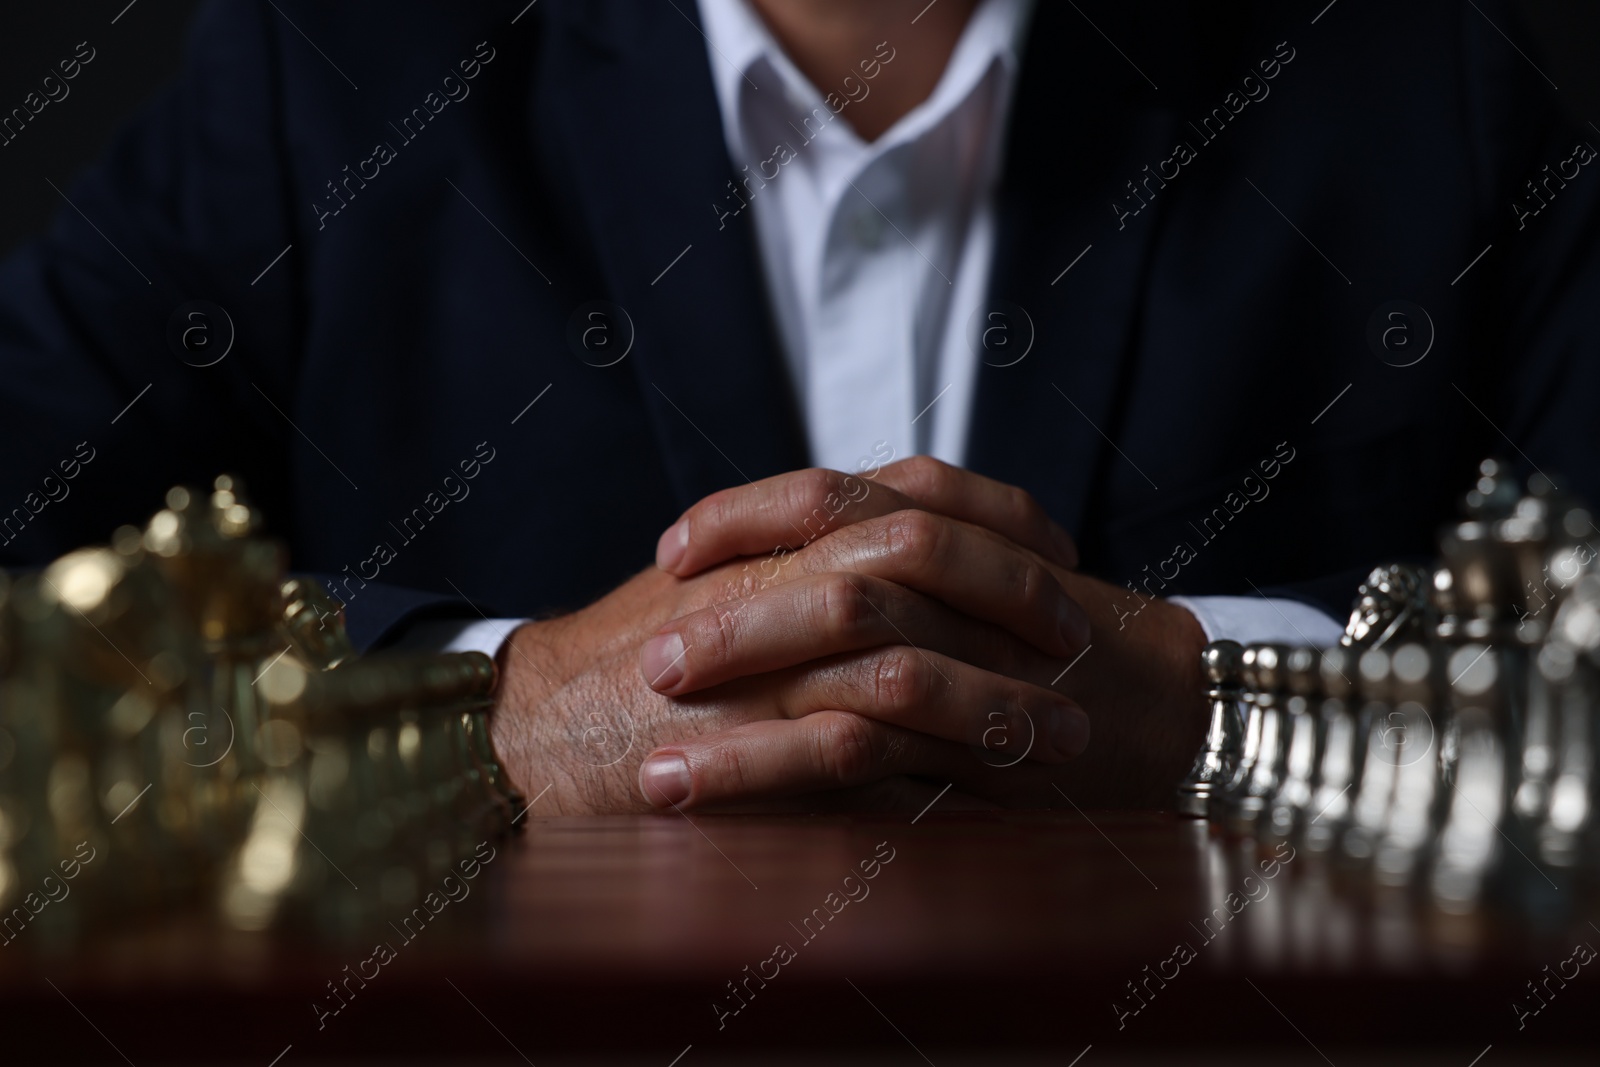 Photo of Man with chess pieces on board before game against dark background, closeup